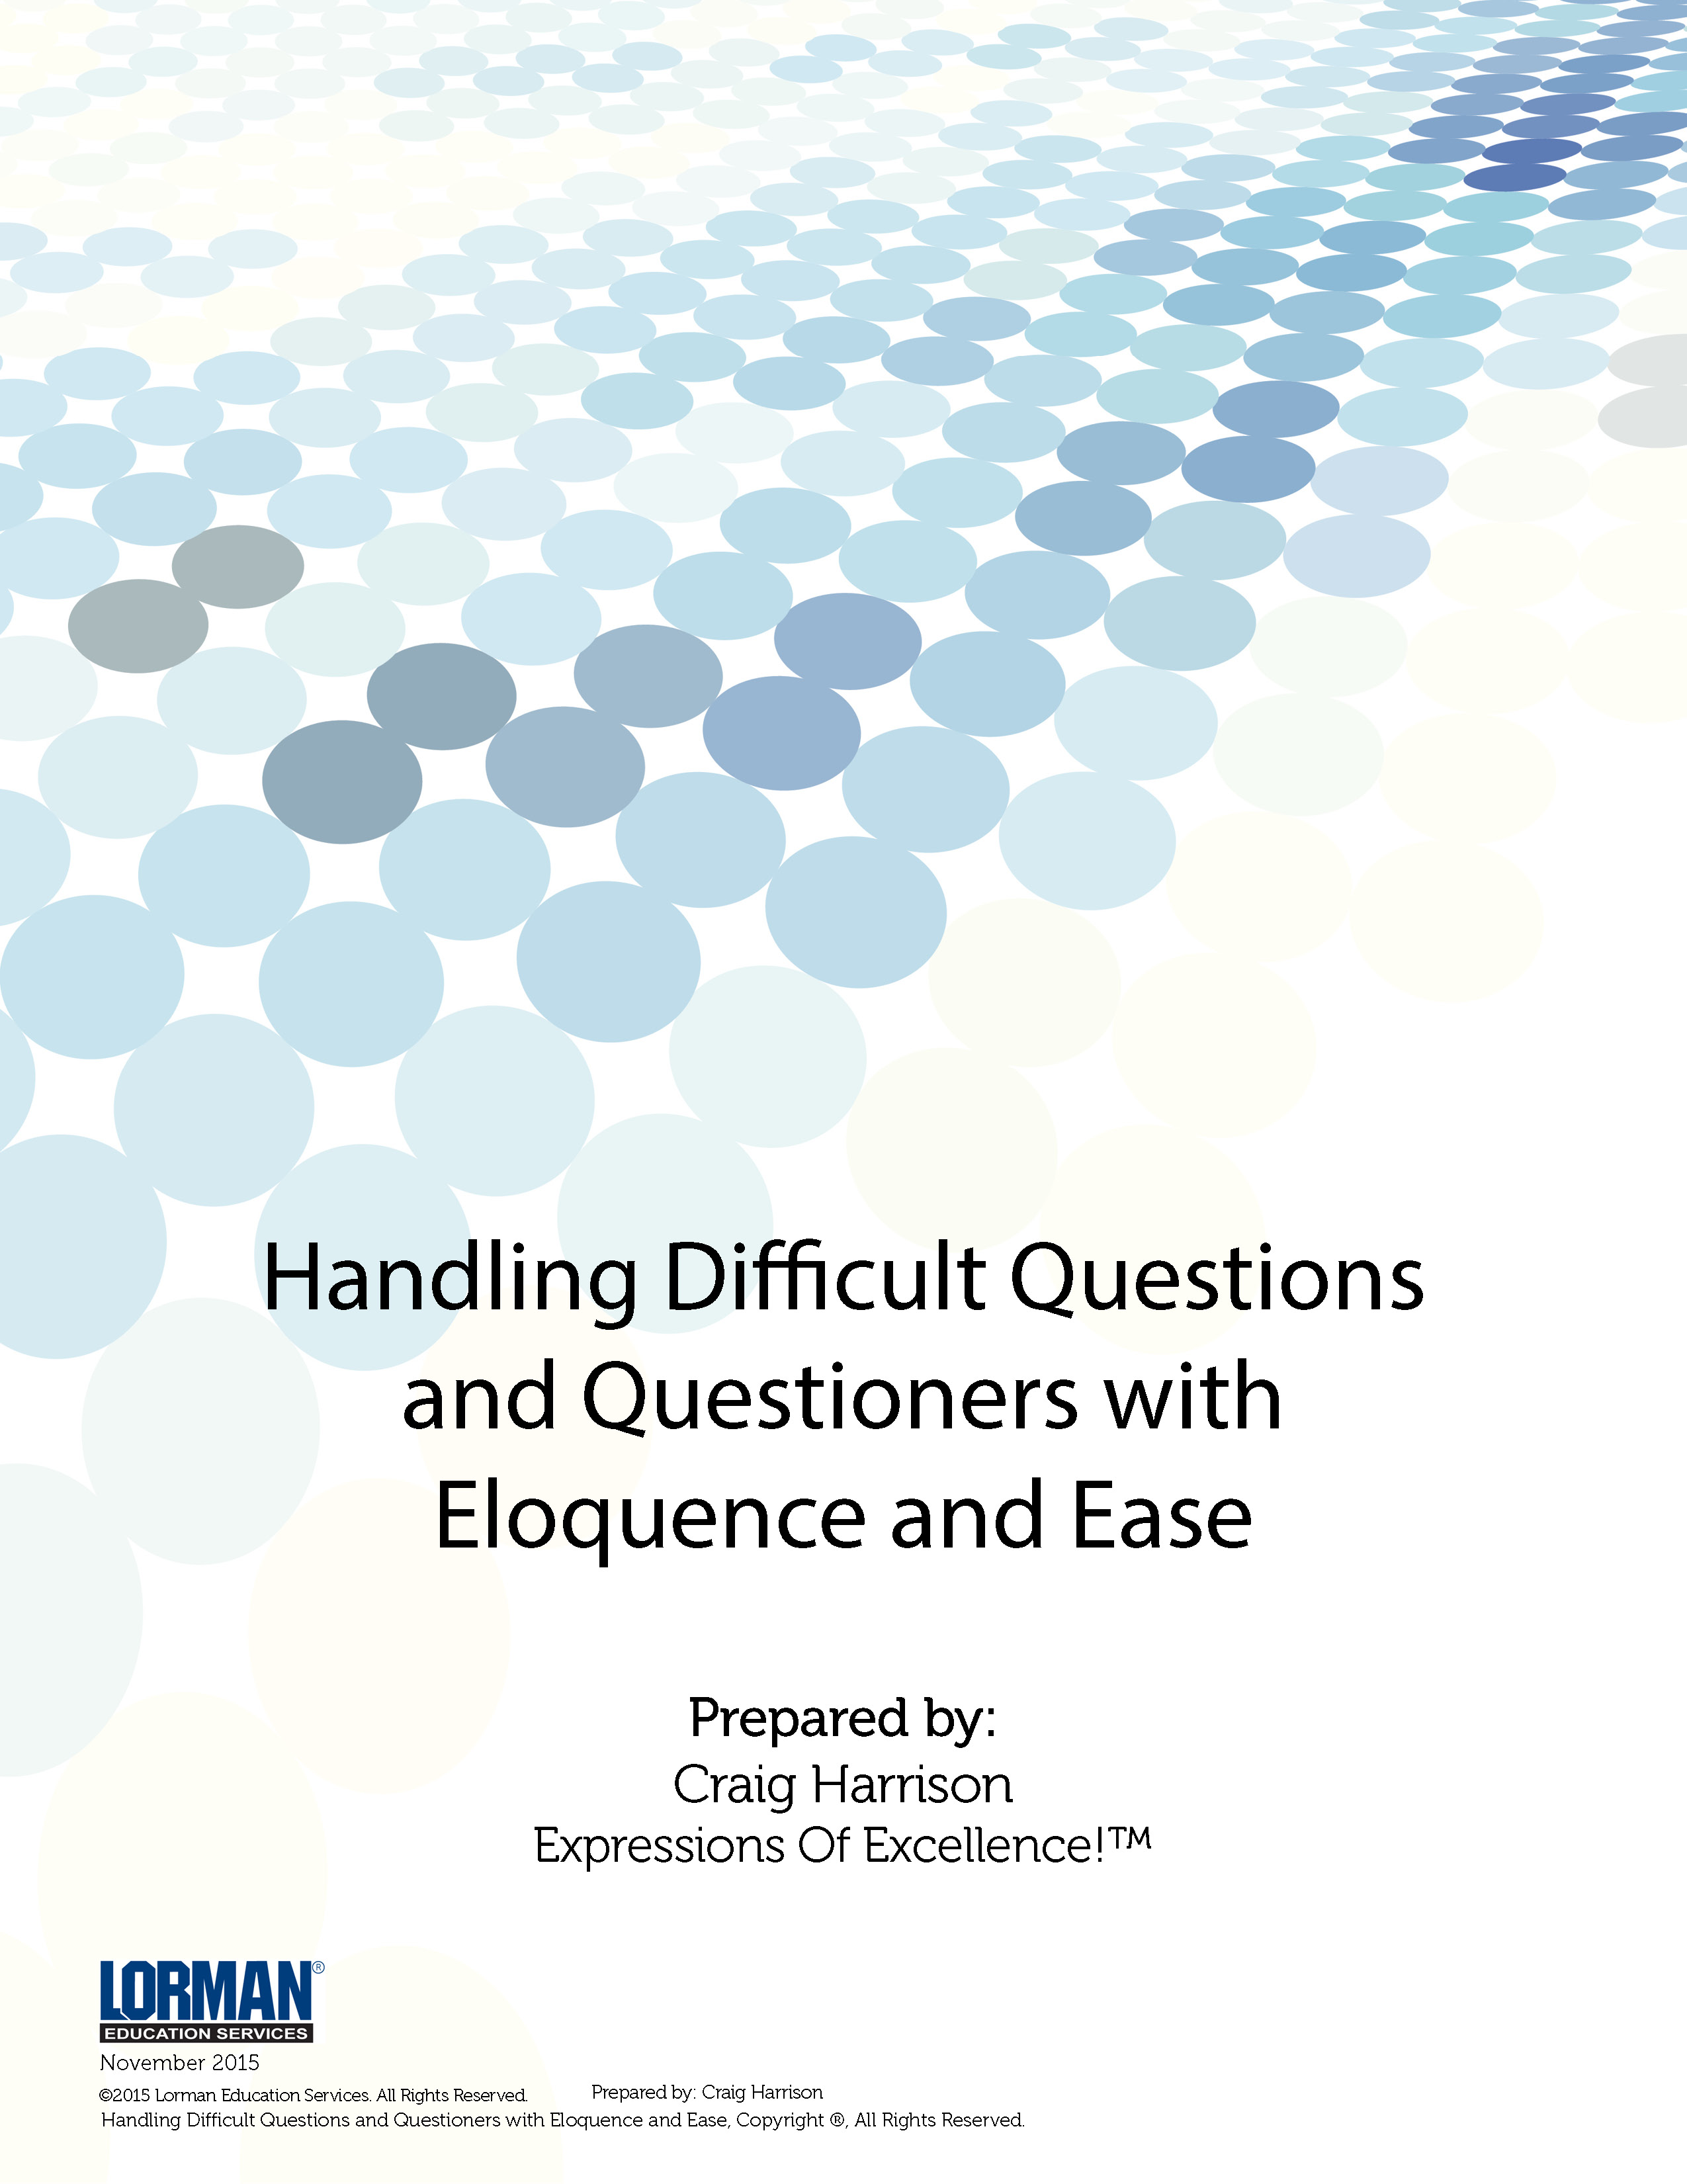 Handling Difficult Questions with Eloquence and Ease